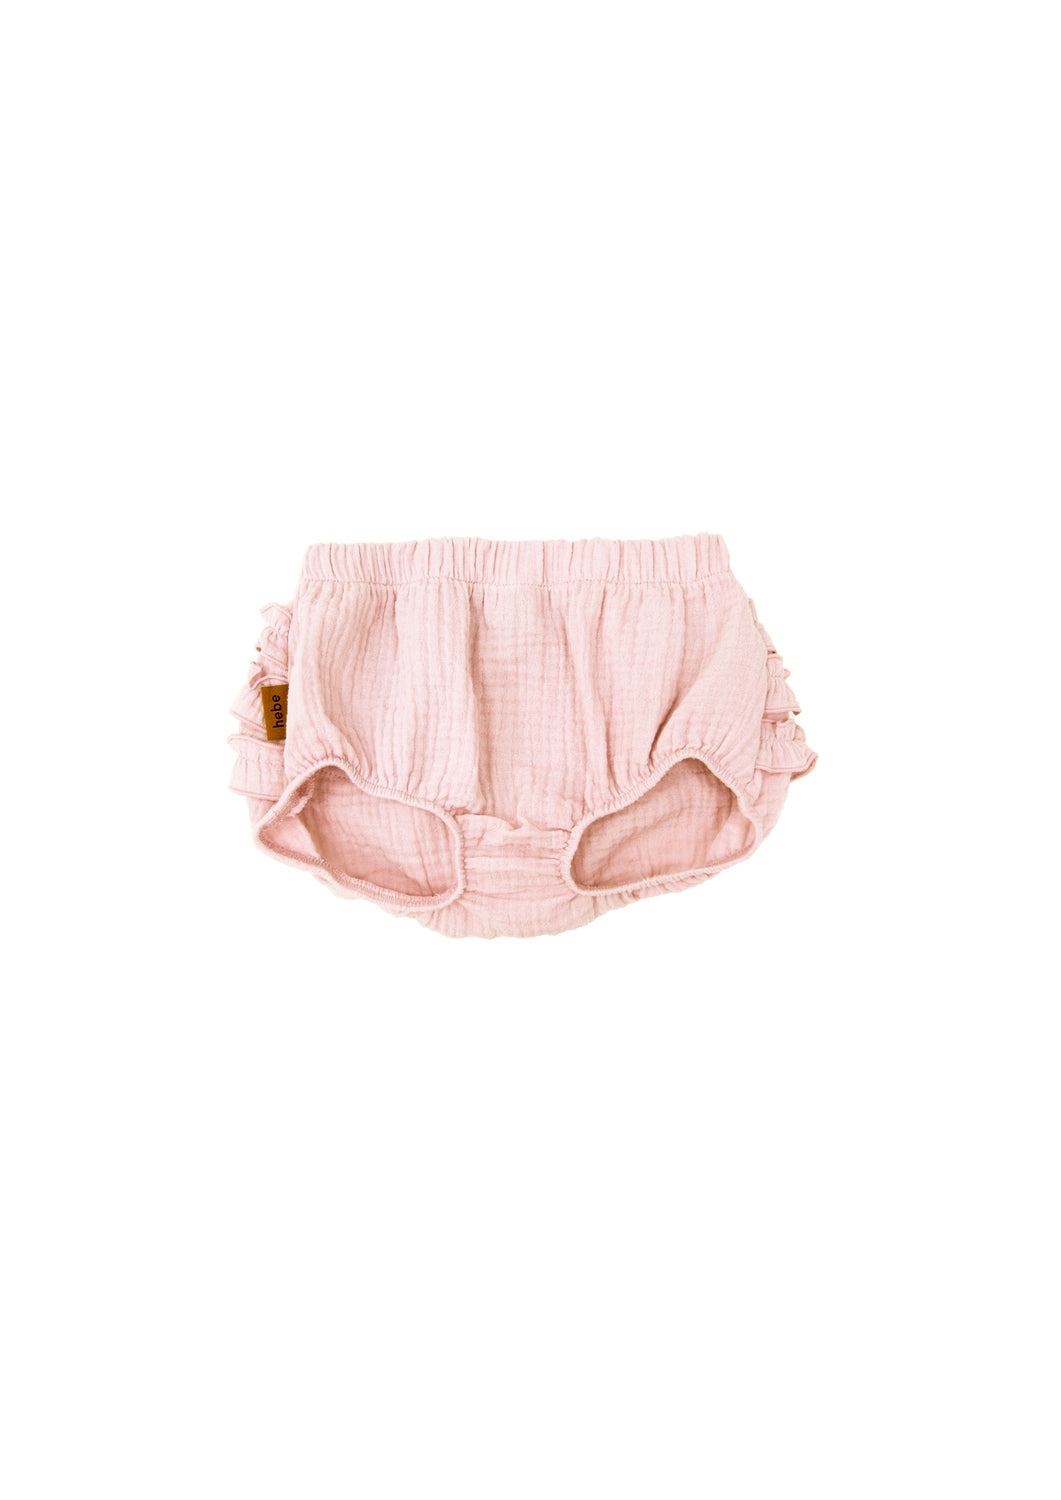 Shop breathable pink cotton baby girl bloomers with ruffles is the most adorable baby girl's outfit. This girly baby ruffled bloomer is made from muslin, which is the perfect choice for baby clothing. Shop muslin baby clothing at MiliMilu and baby cothing that is practical and easy to wear, the best baby gifts online.